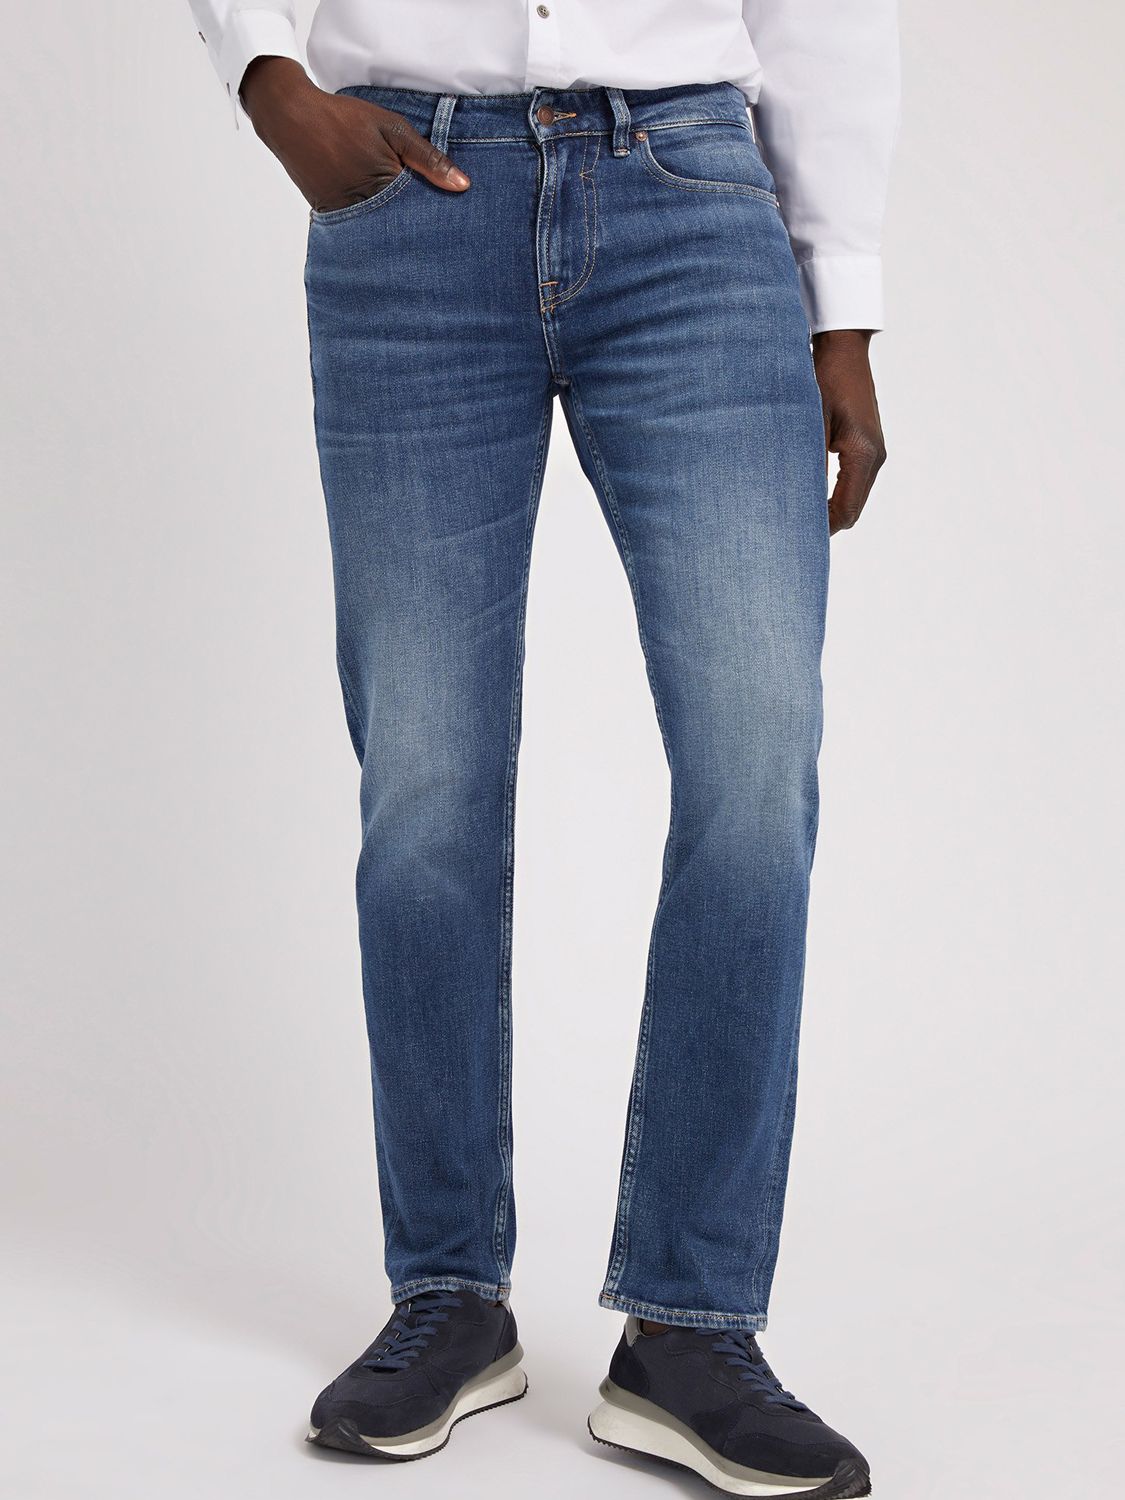 GUESS Angels Slim Fit Denim Jeans, Carry Mid. at John Lewis & Partners